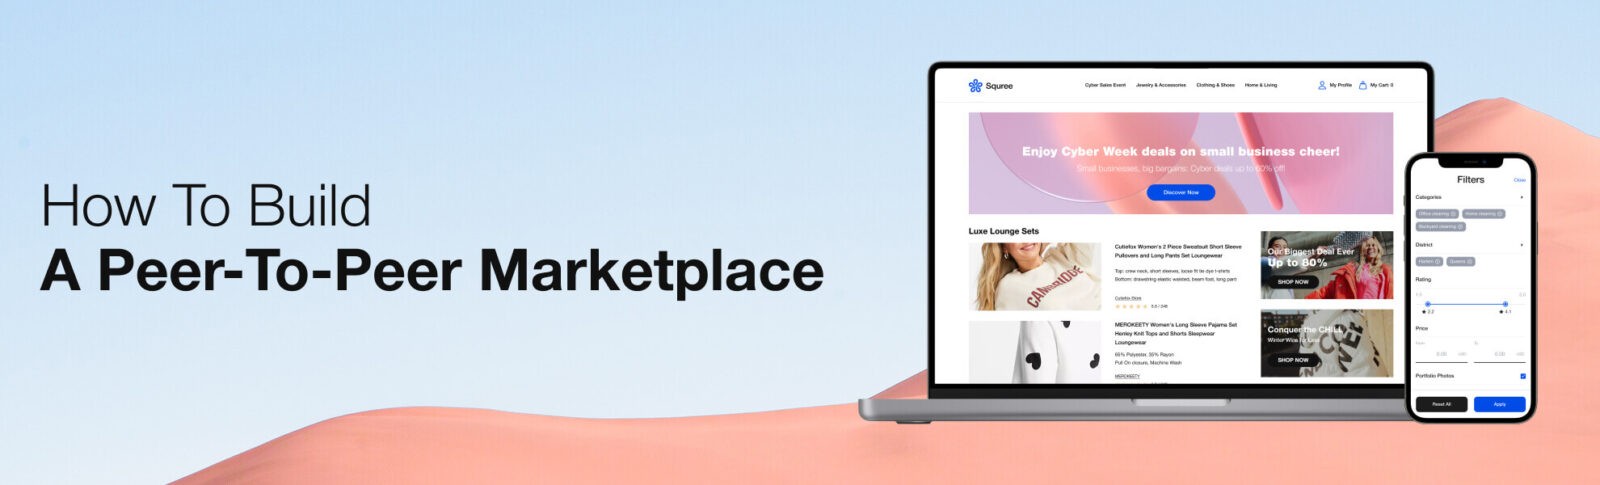 How to Build a Peer-to-Peer (P2P) Marketplace